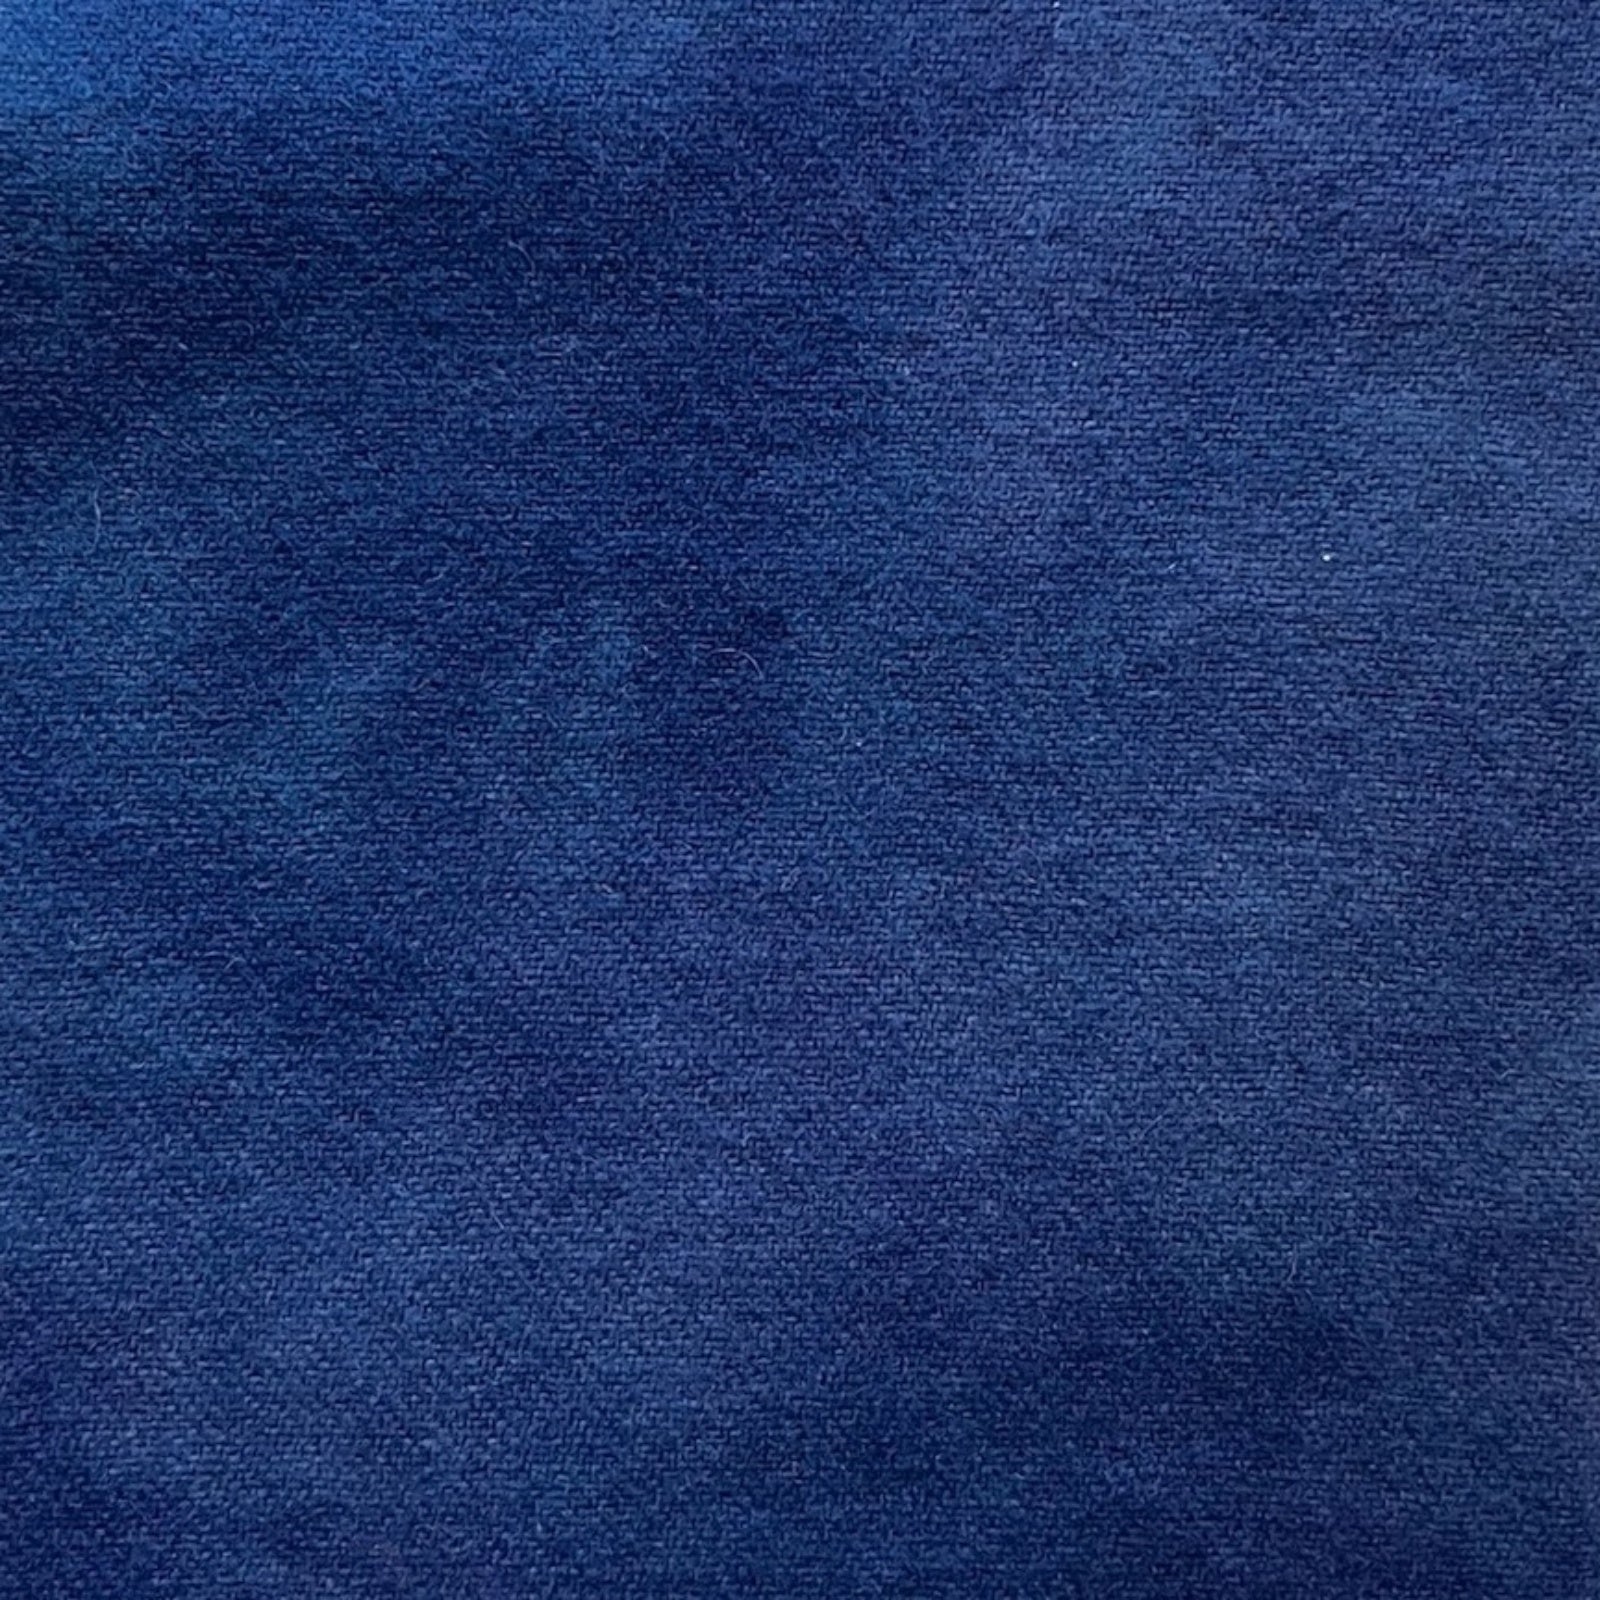 Blue Chip - Colorama Hand Dyed Wool - Offered by HoneyBee Hive Rug Hooking